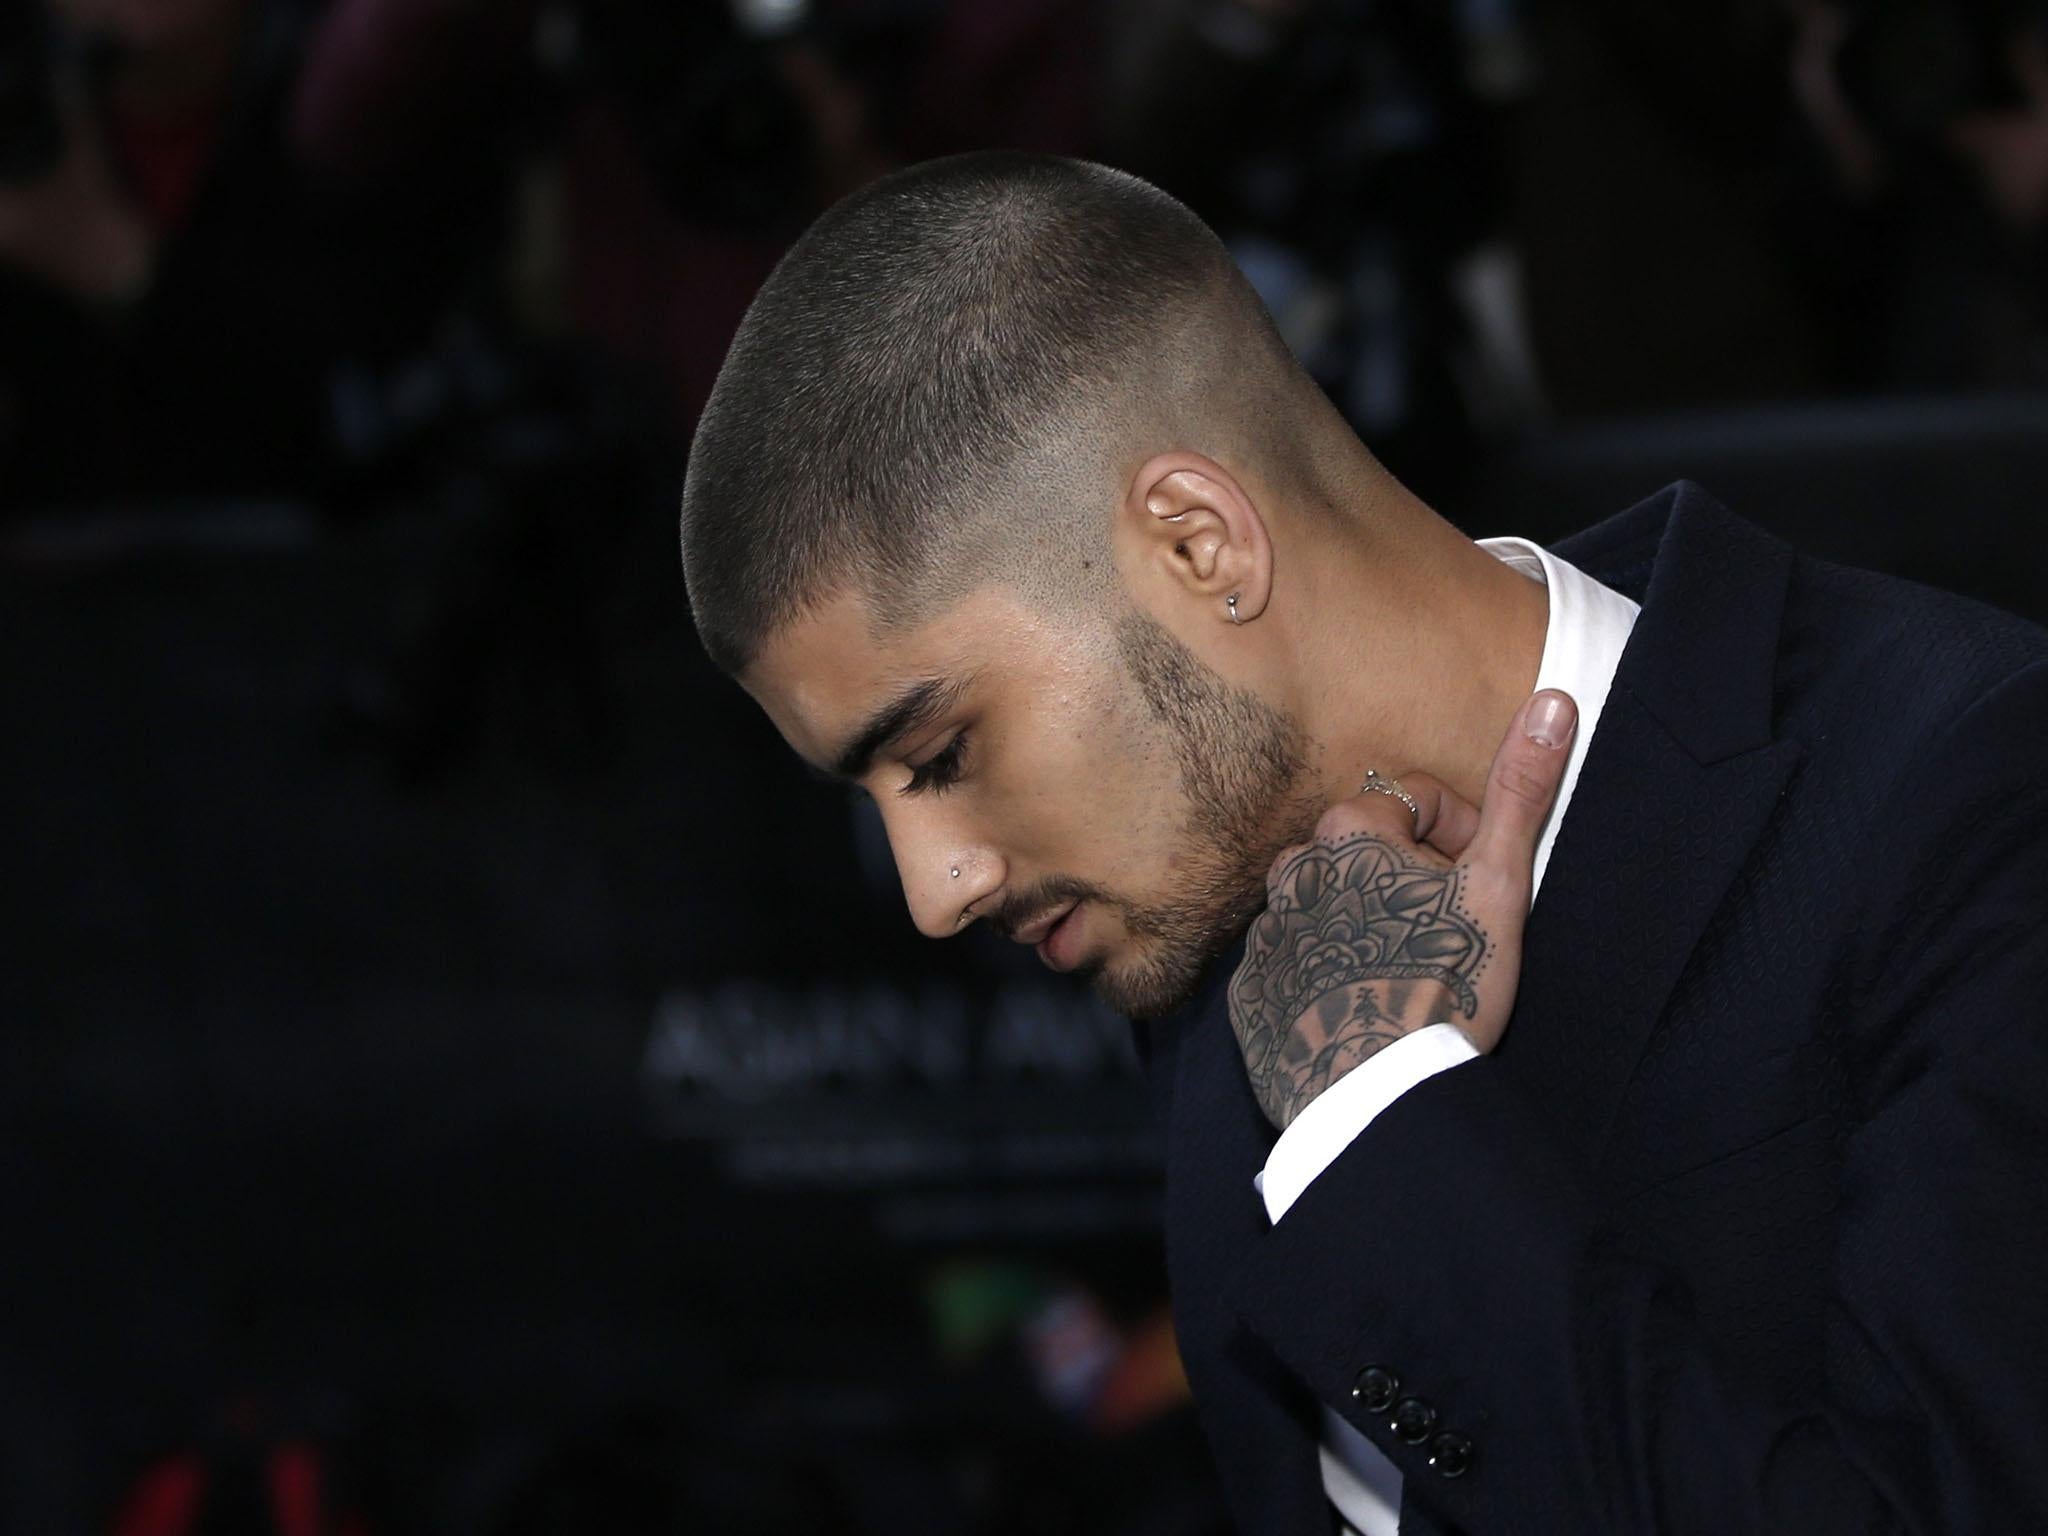 How To Get The Zayn Malik Haircut (2 Styles, One Direction) - NO GUNK